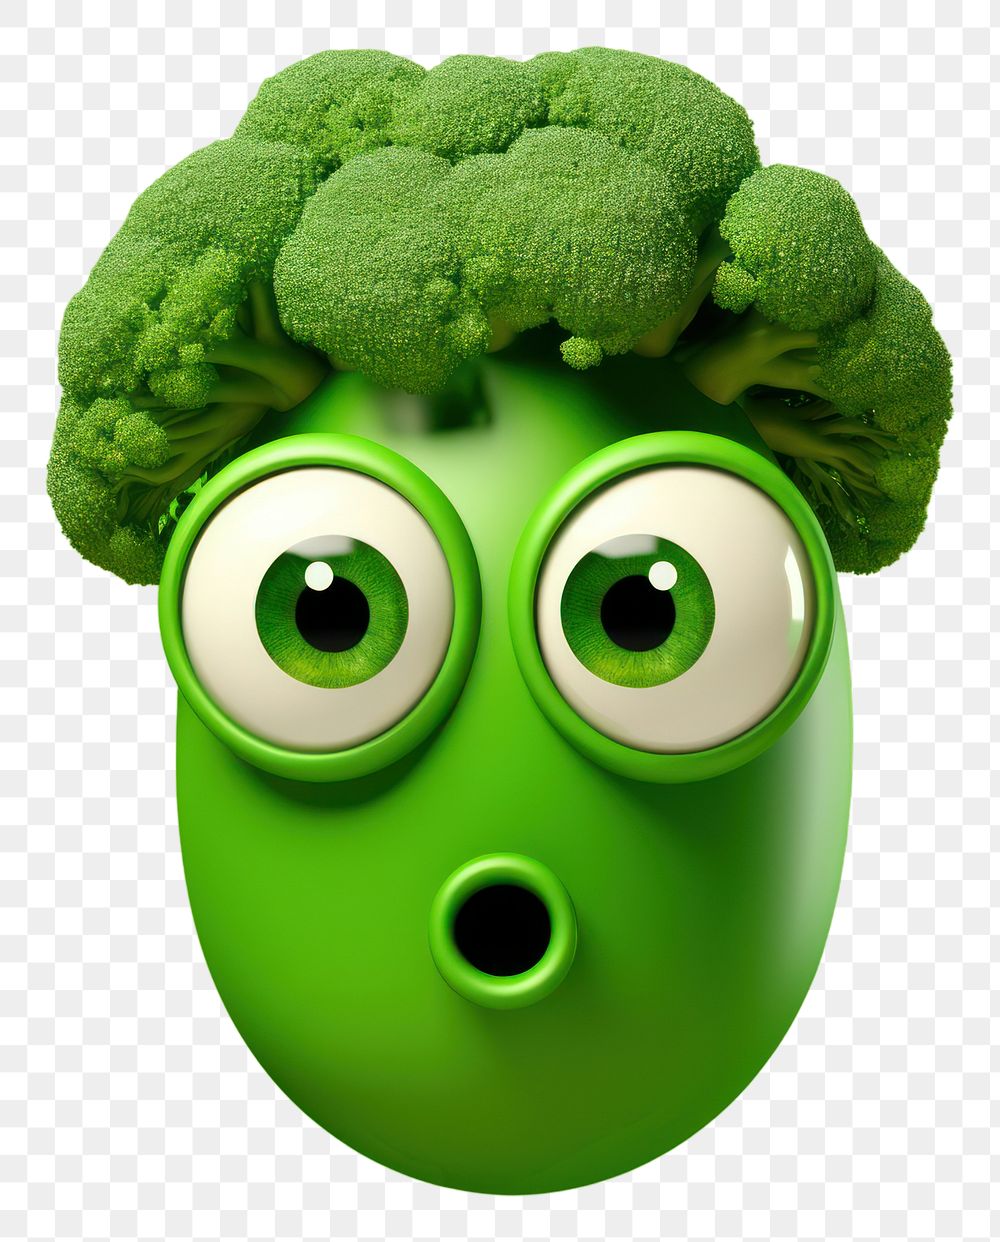 PNG Veggie with face wallpaper vegetable broccoli green.